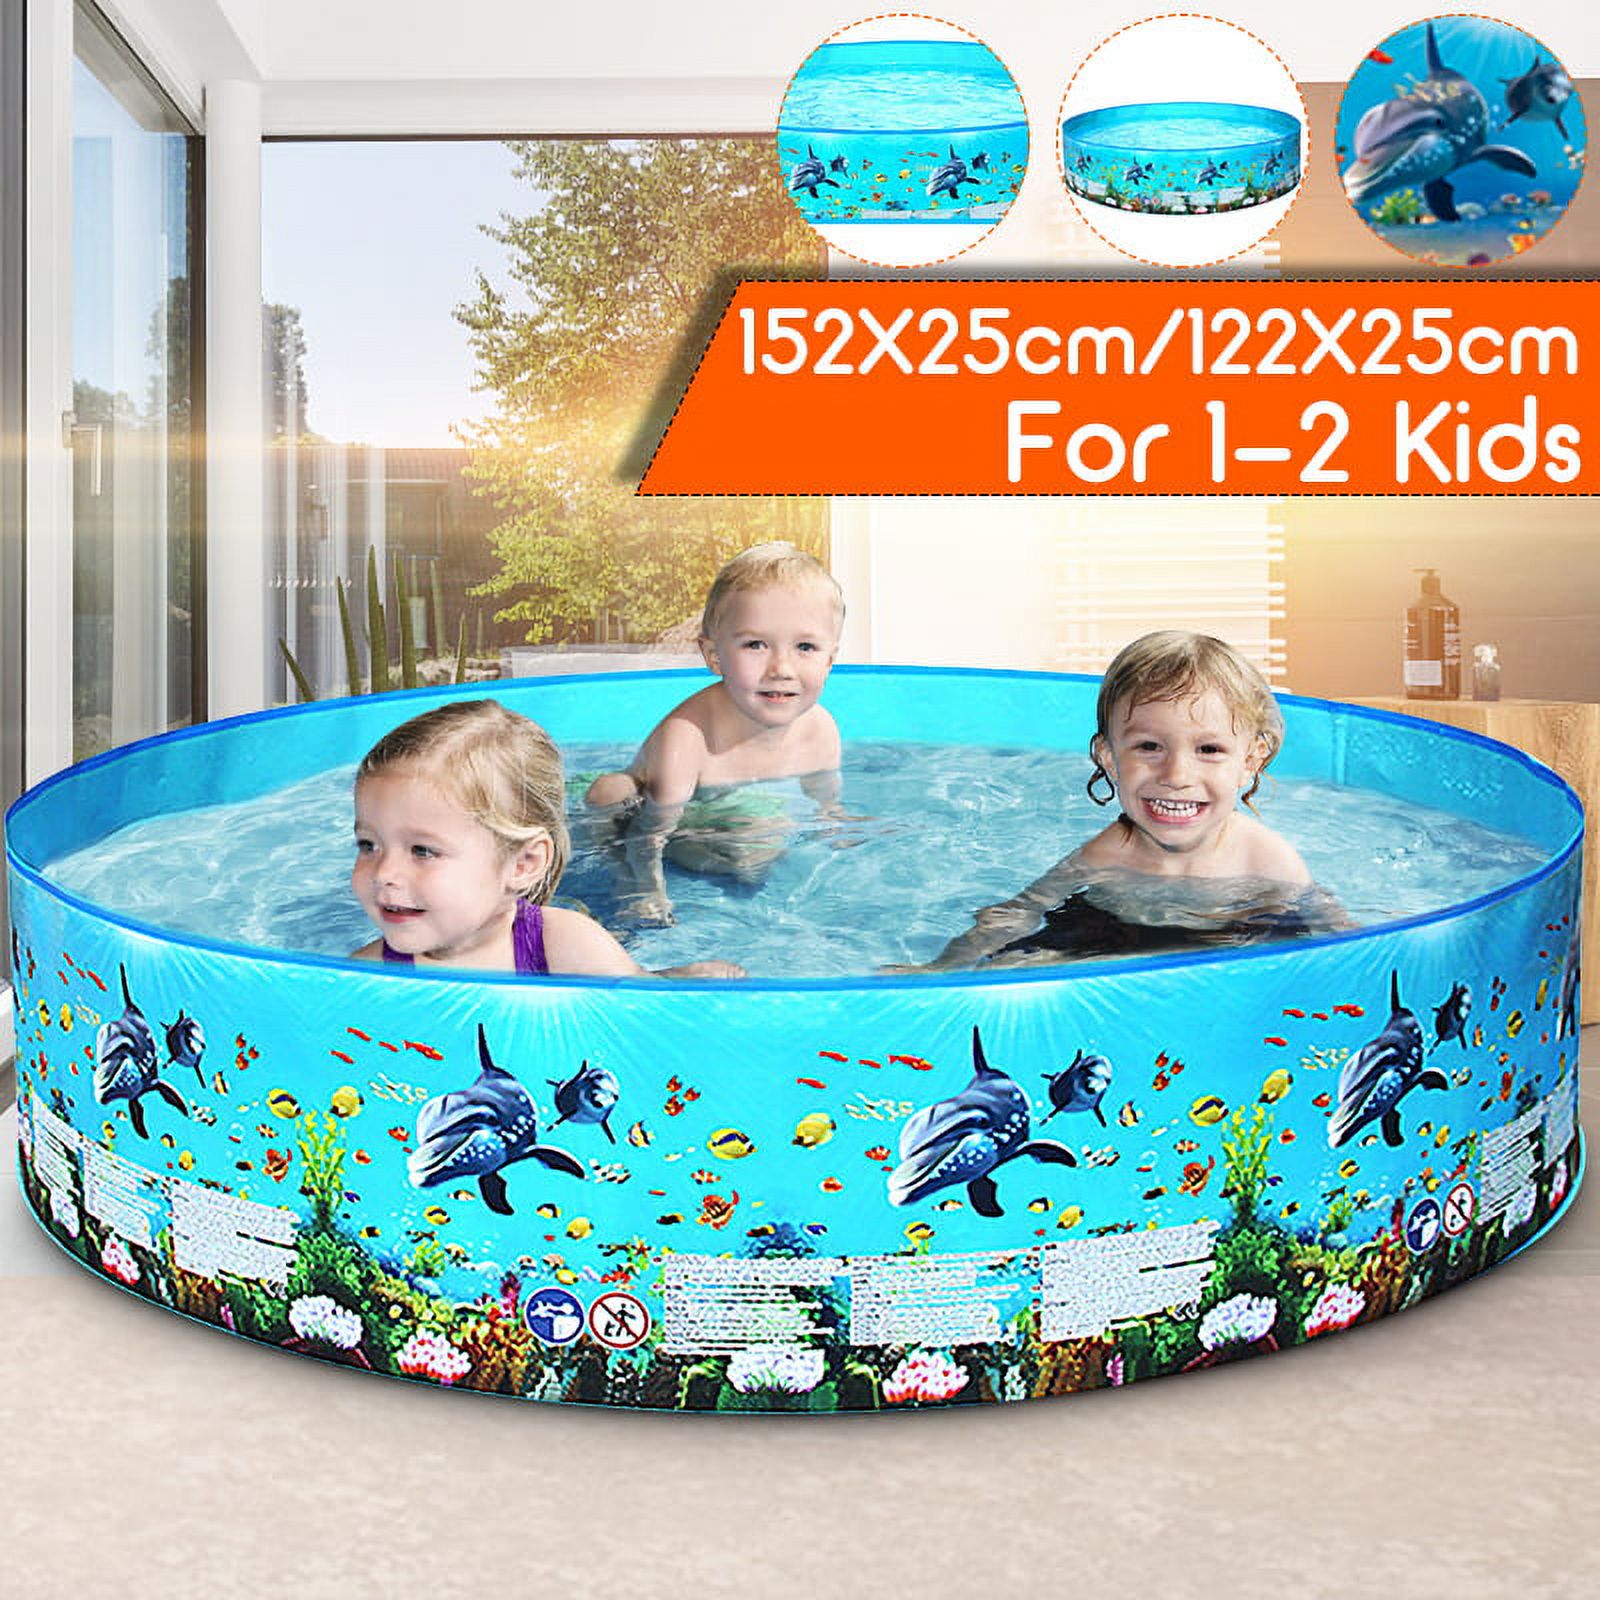 4' x 10" inch Pool Family Paddling Pool Swimming Pool, Garden Round Inflatable Baby Swimming Pool, Portable Inflatable Child / Children Pool - image 1 of 6